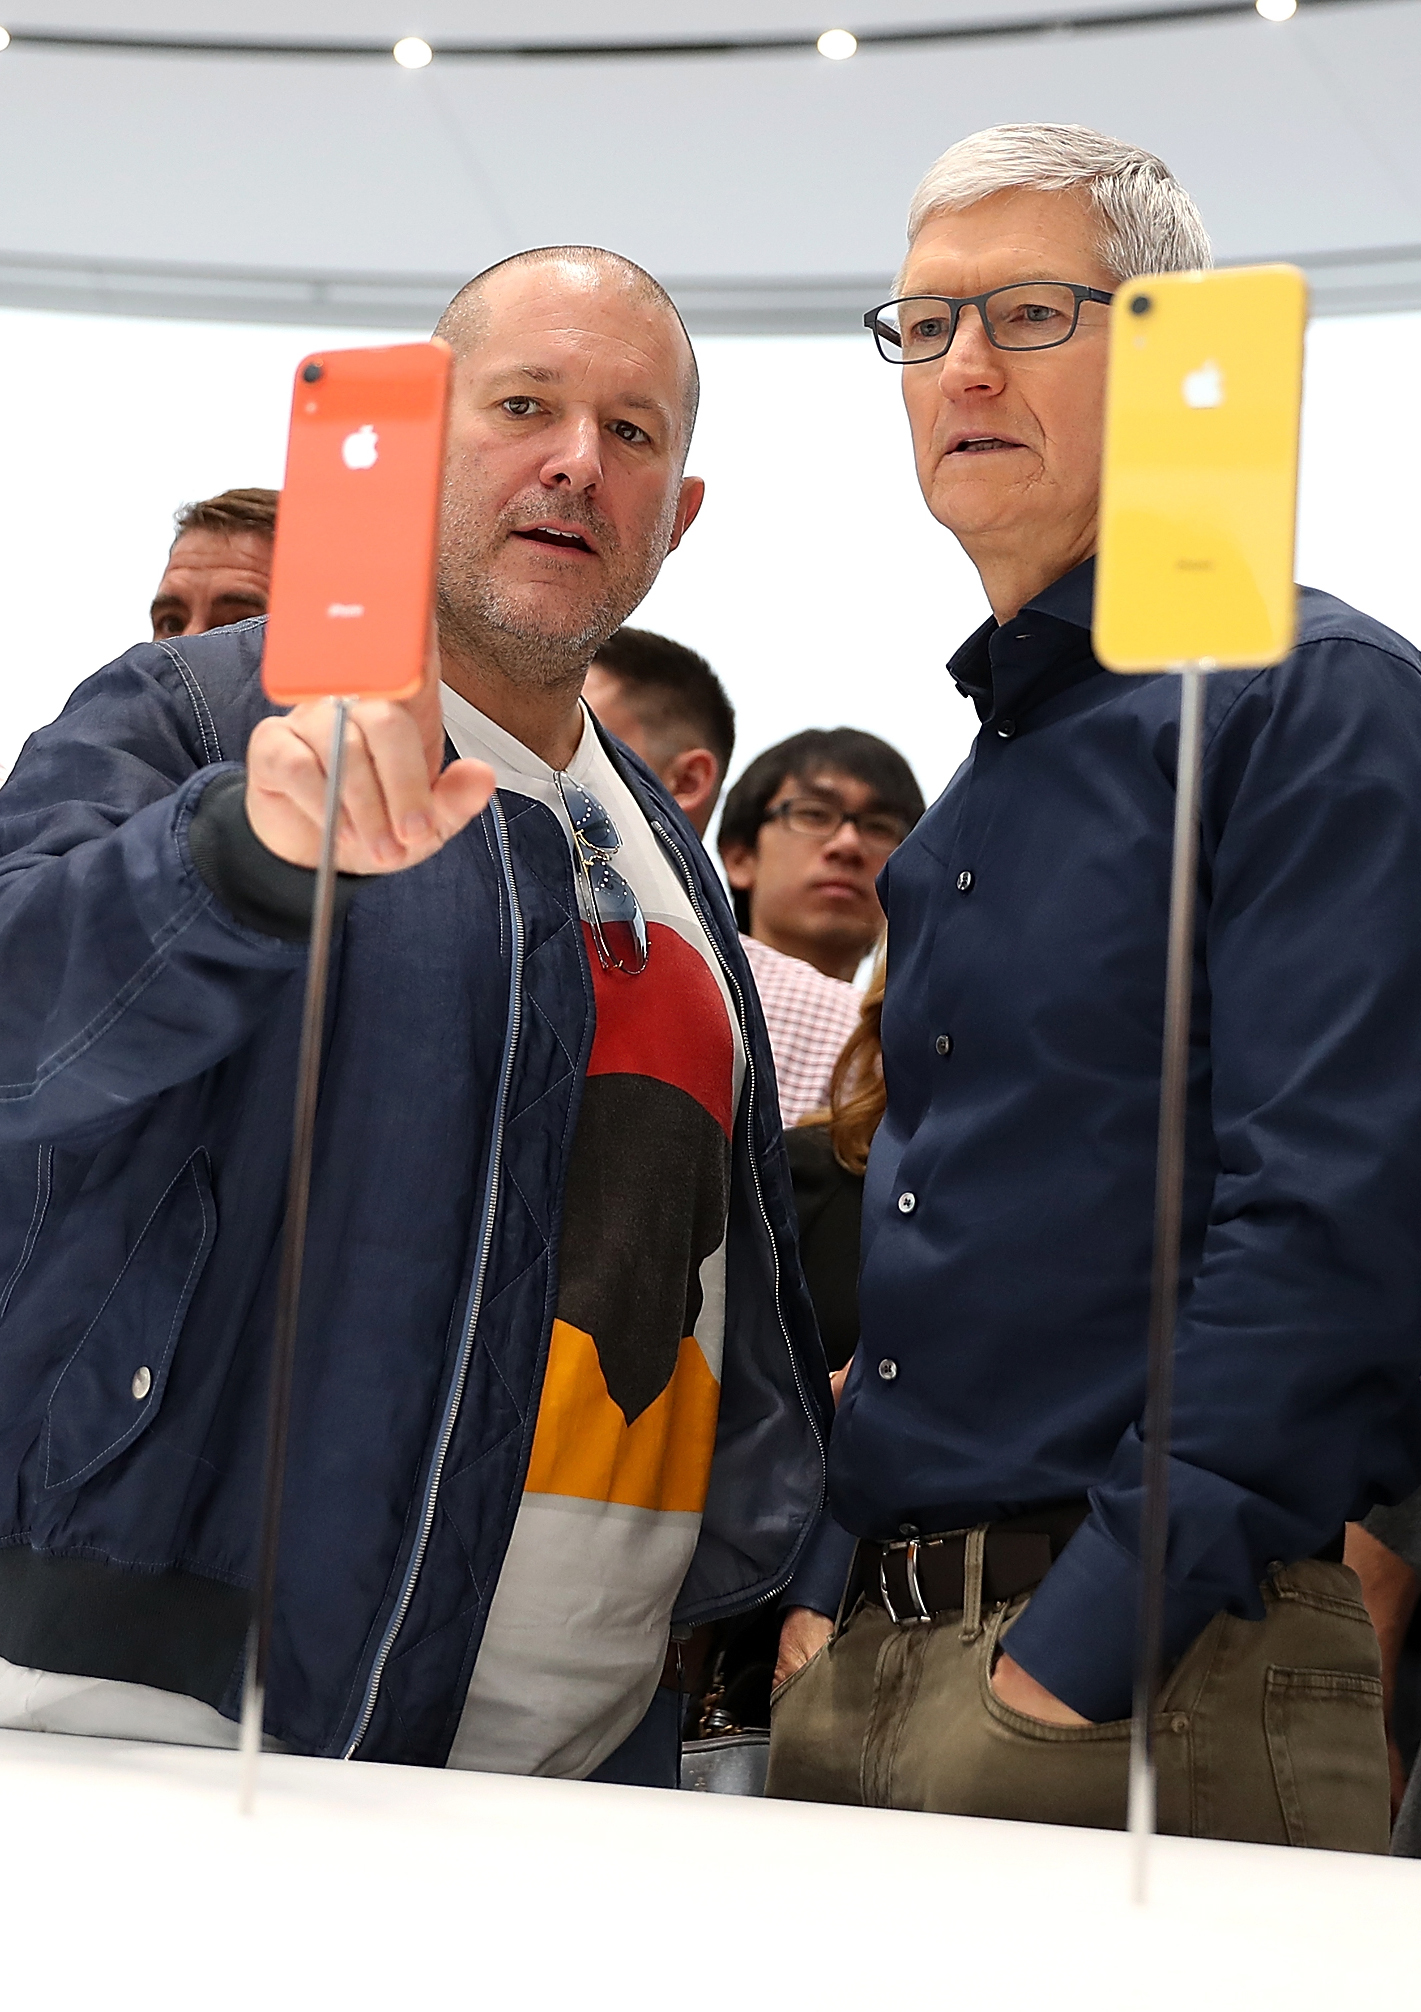 Two men holding up colorful smartphones in a brightly lit, modern space.